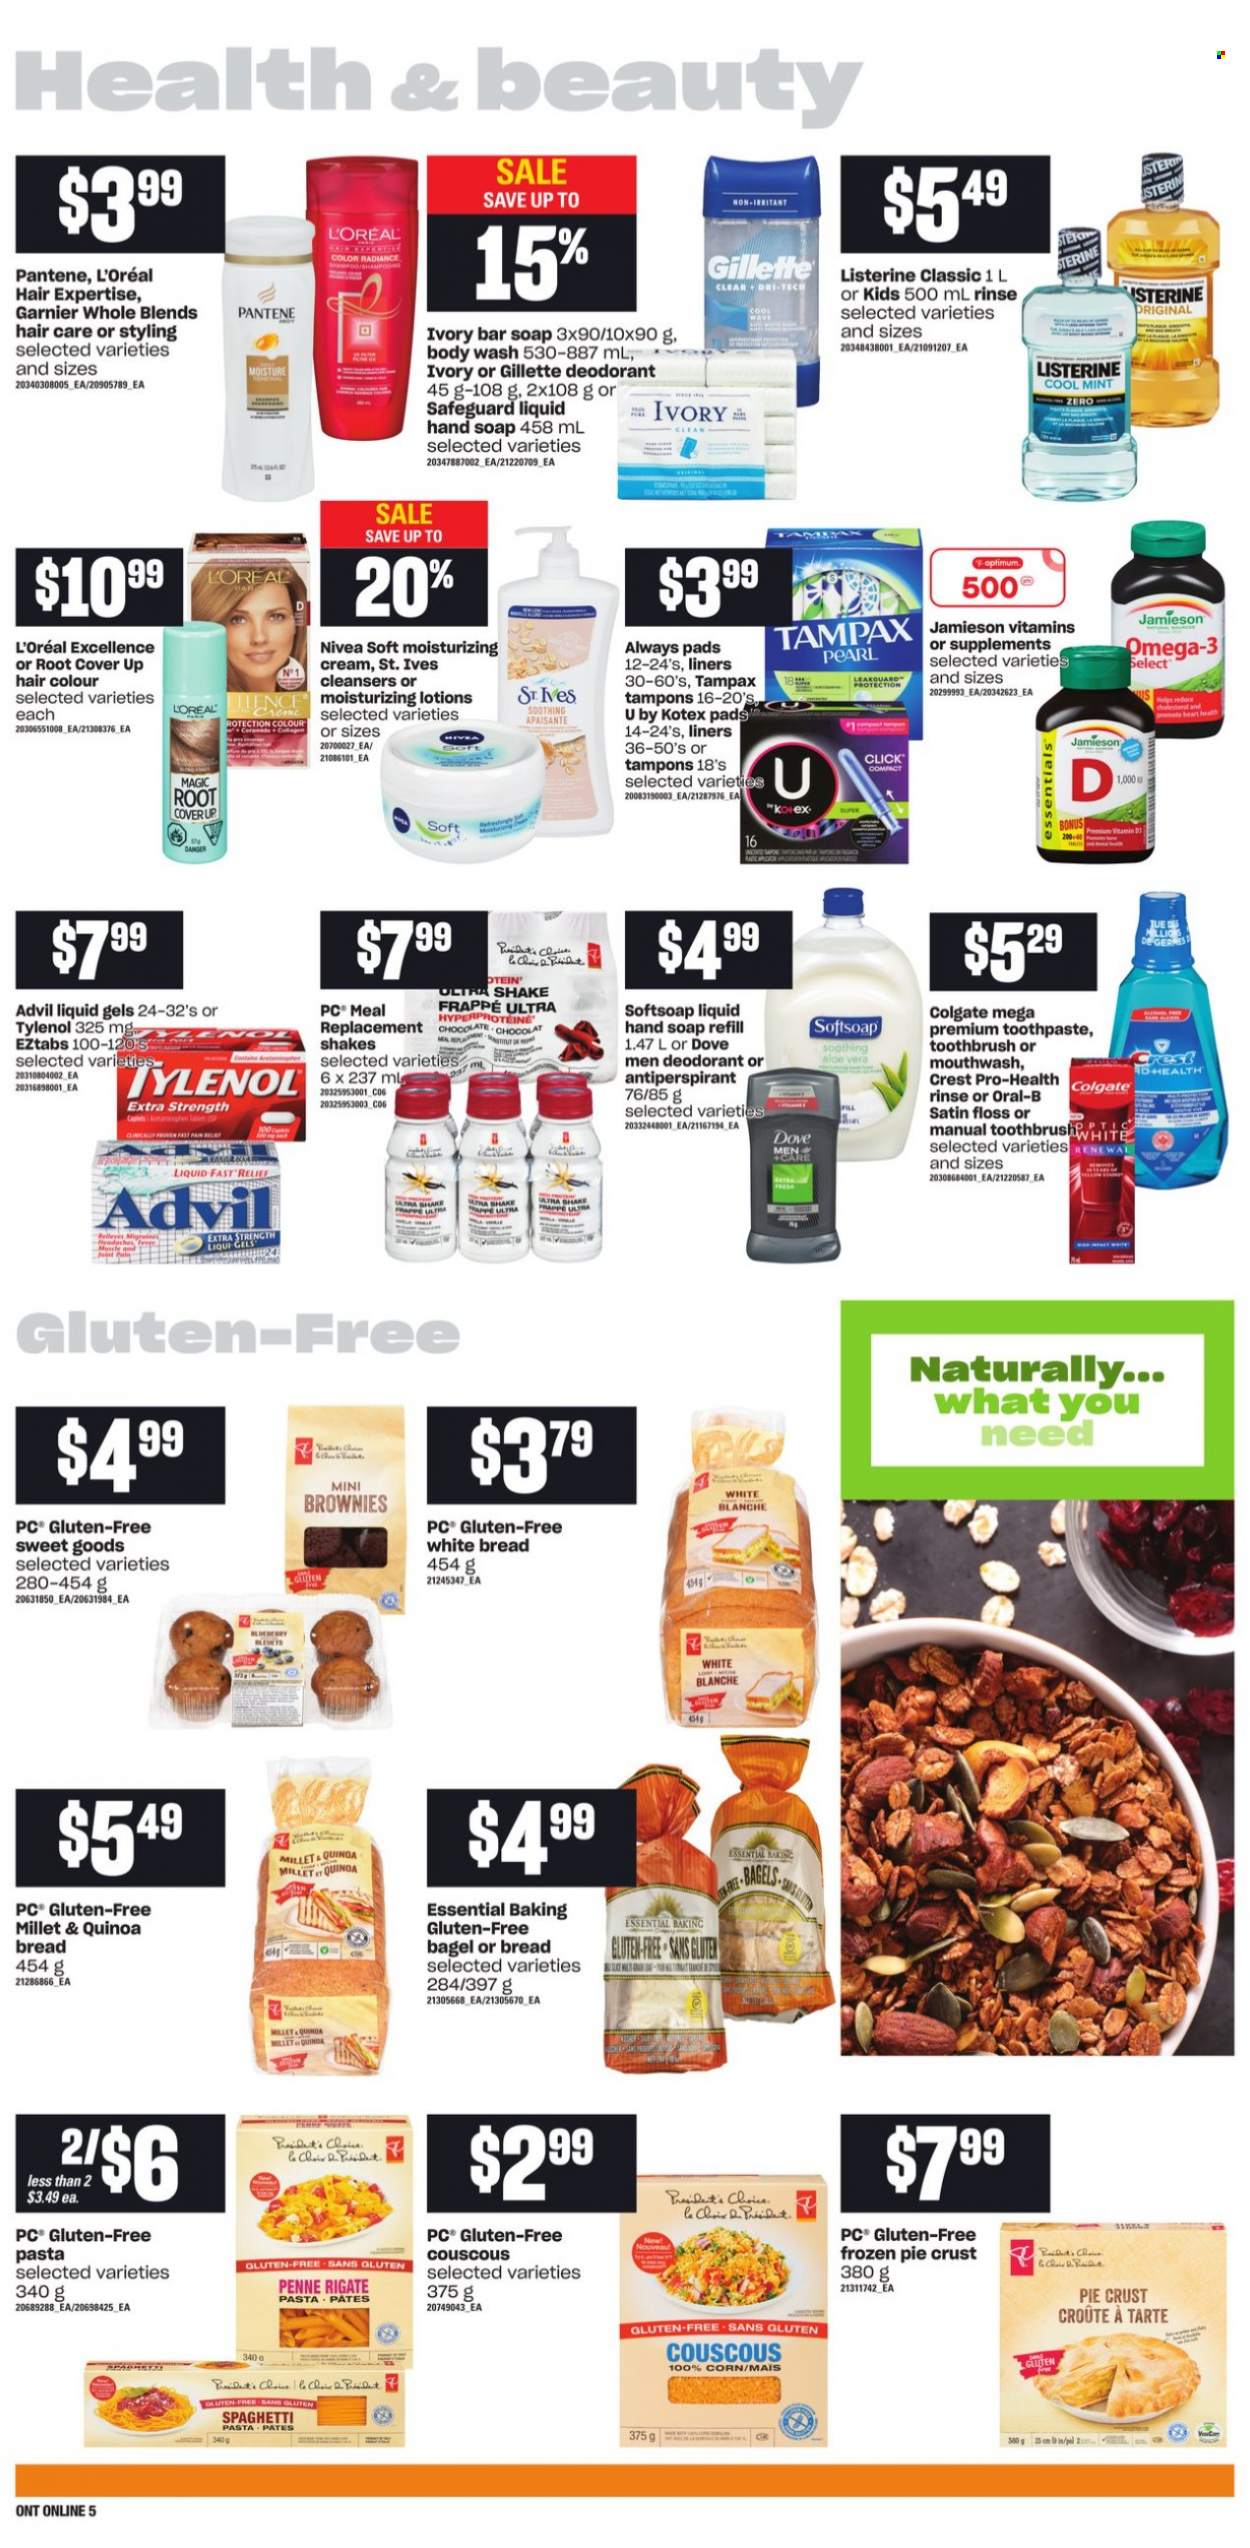 thumbnail - Loblaws Flyer - October 14, 2021 - October 20, 2021 - Sales products - bagels, bread, white bread, brownies, corn, spaghetti, pasta, shake, chocolate, pie crust, penne, WAVE, body wash, Softsoap, hand soap, soap bar, soap, toothbrush, toothpaste, mouthwash, Crest, Always pads, Kotex, Kotex pads, tampons, L’Oréal, hair color, anti-perspirant, Tylenol, Omega-3, Advil Rapid, couscous, Dove, Colgate, Garnier, Gillette, Listerine, quinoa, Tampax, Pantene, Nivea, Oral-B, deodorant. Page 9.